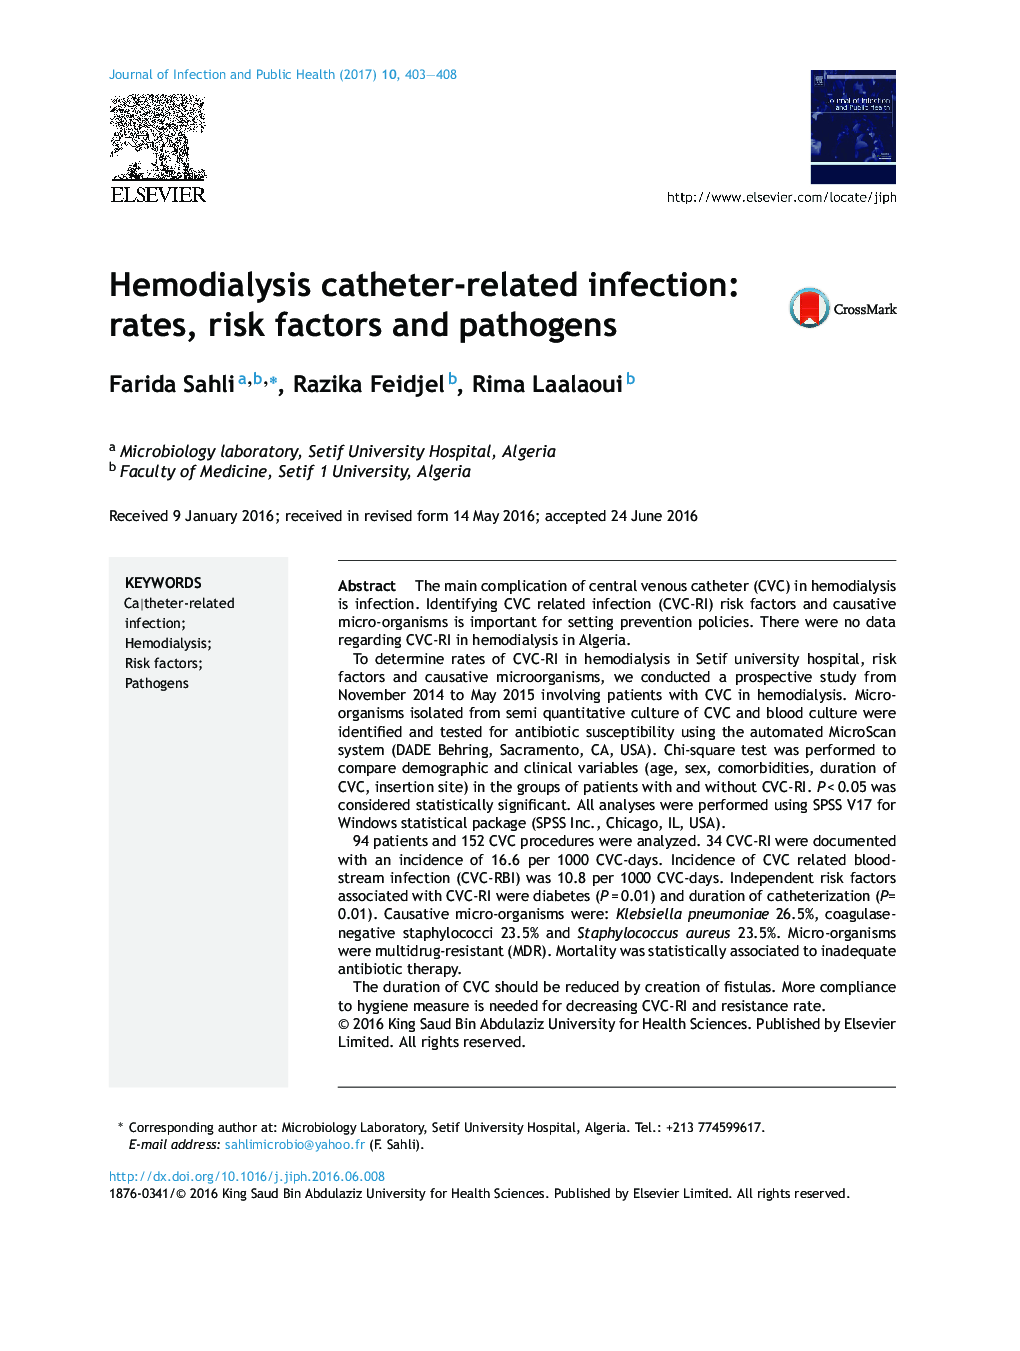 Hemodialysis catheter-related infection: rates, risk factors and pathogens